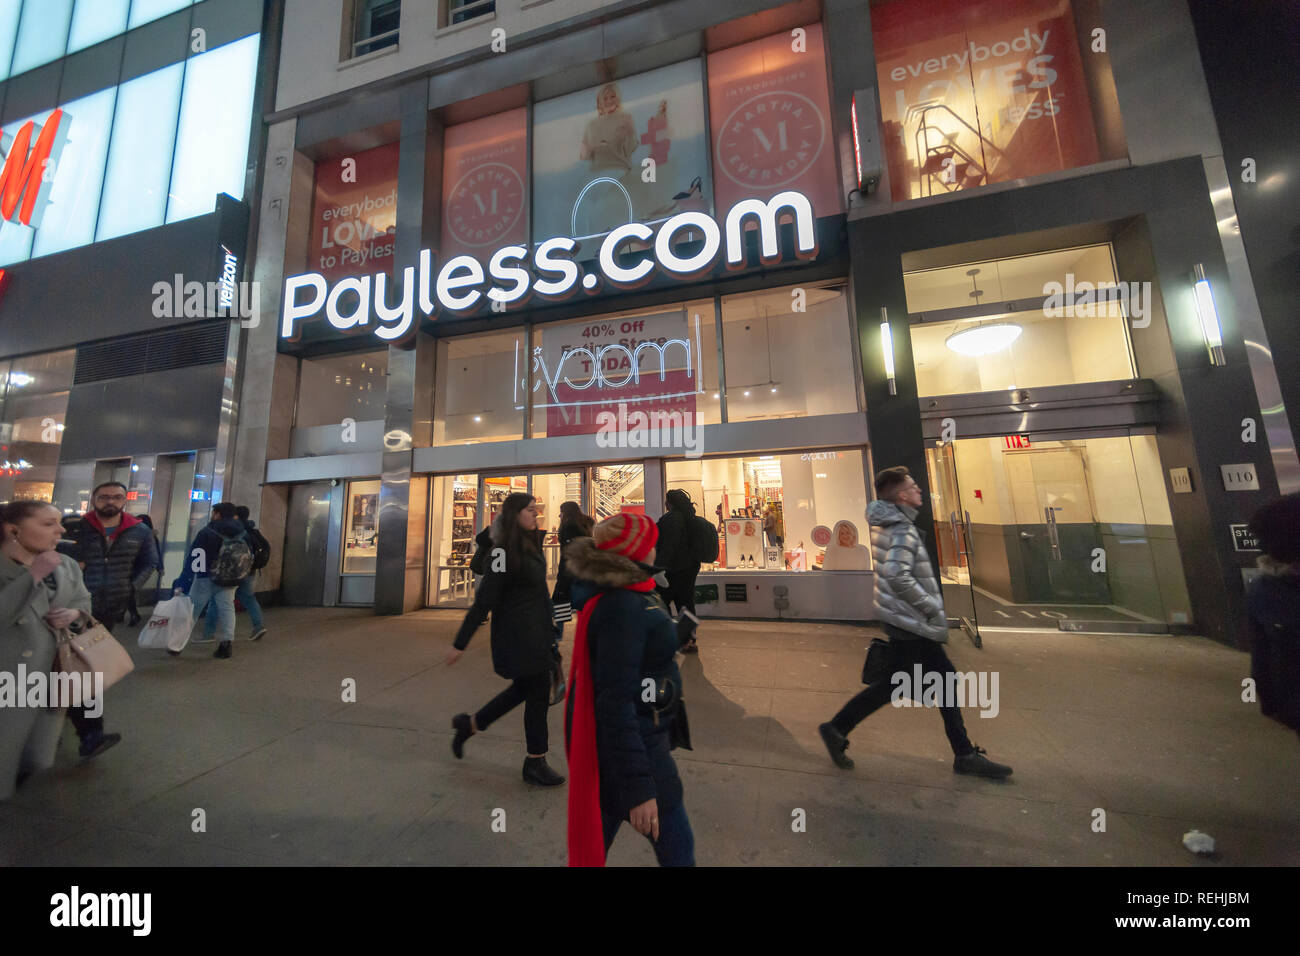 A Payless ShoeSource store in Herald Square in New York on Tuesday, January 15, 2019. The retailer is reported to have hired an advisor for evaluation of strategic alternatives which could include a sale of the company. Payless emerged from bankruptcy protection less than 18 months ago. (Â© Richard B. Levine) Stock Photo